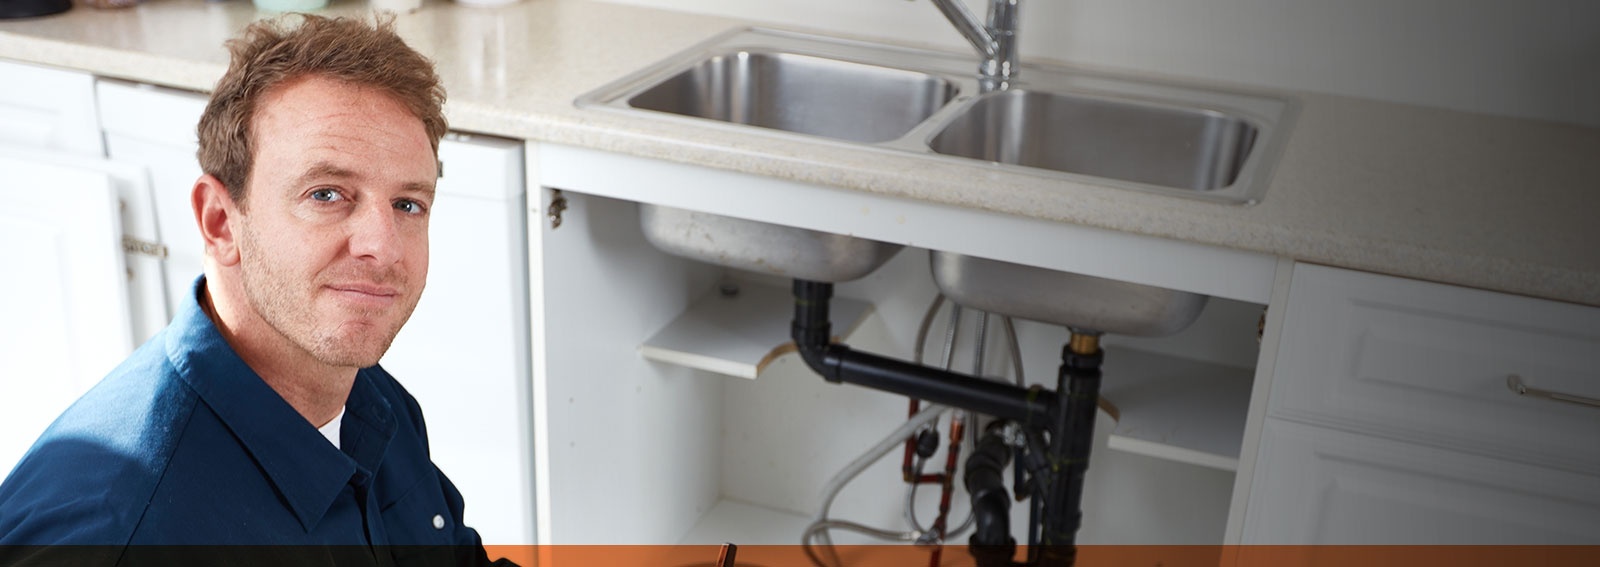 Plumbing Systems Fixtures Inspection Central South New Jersey